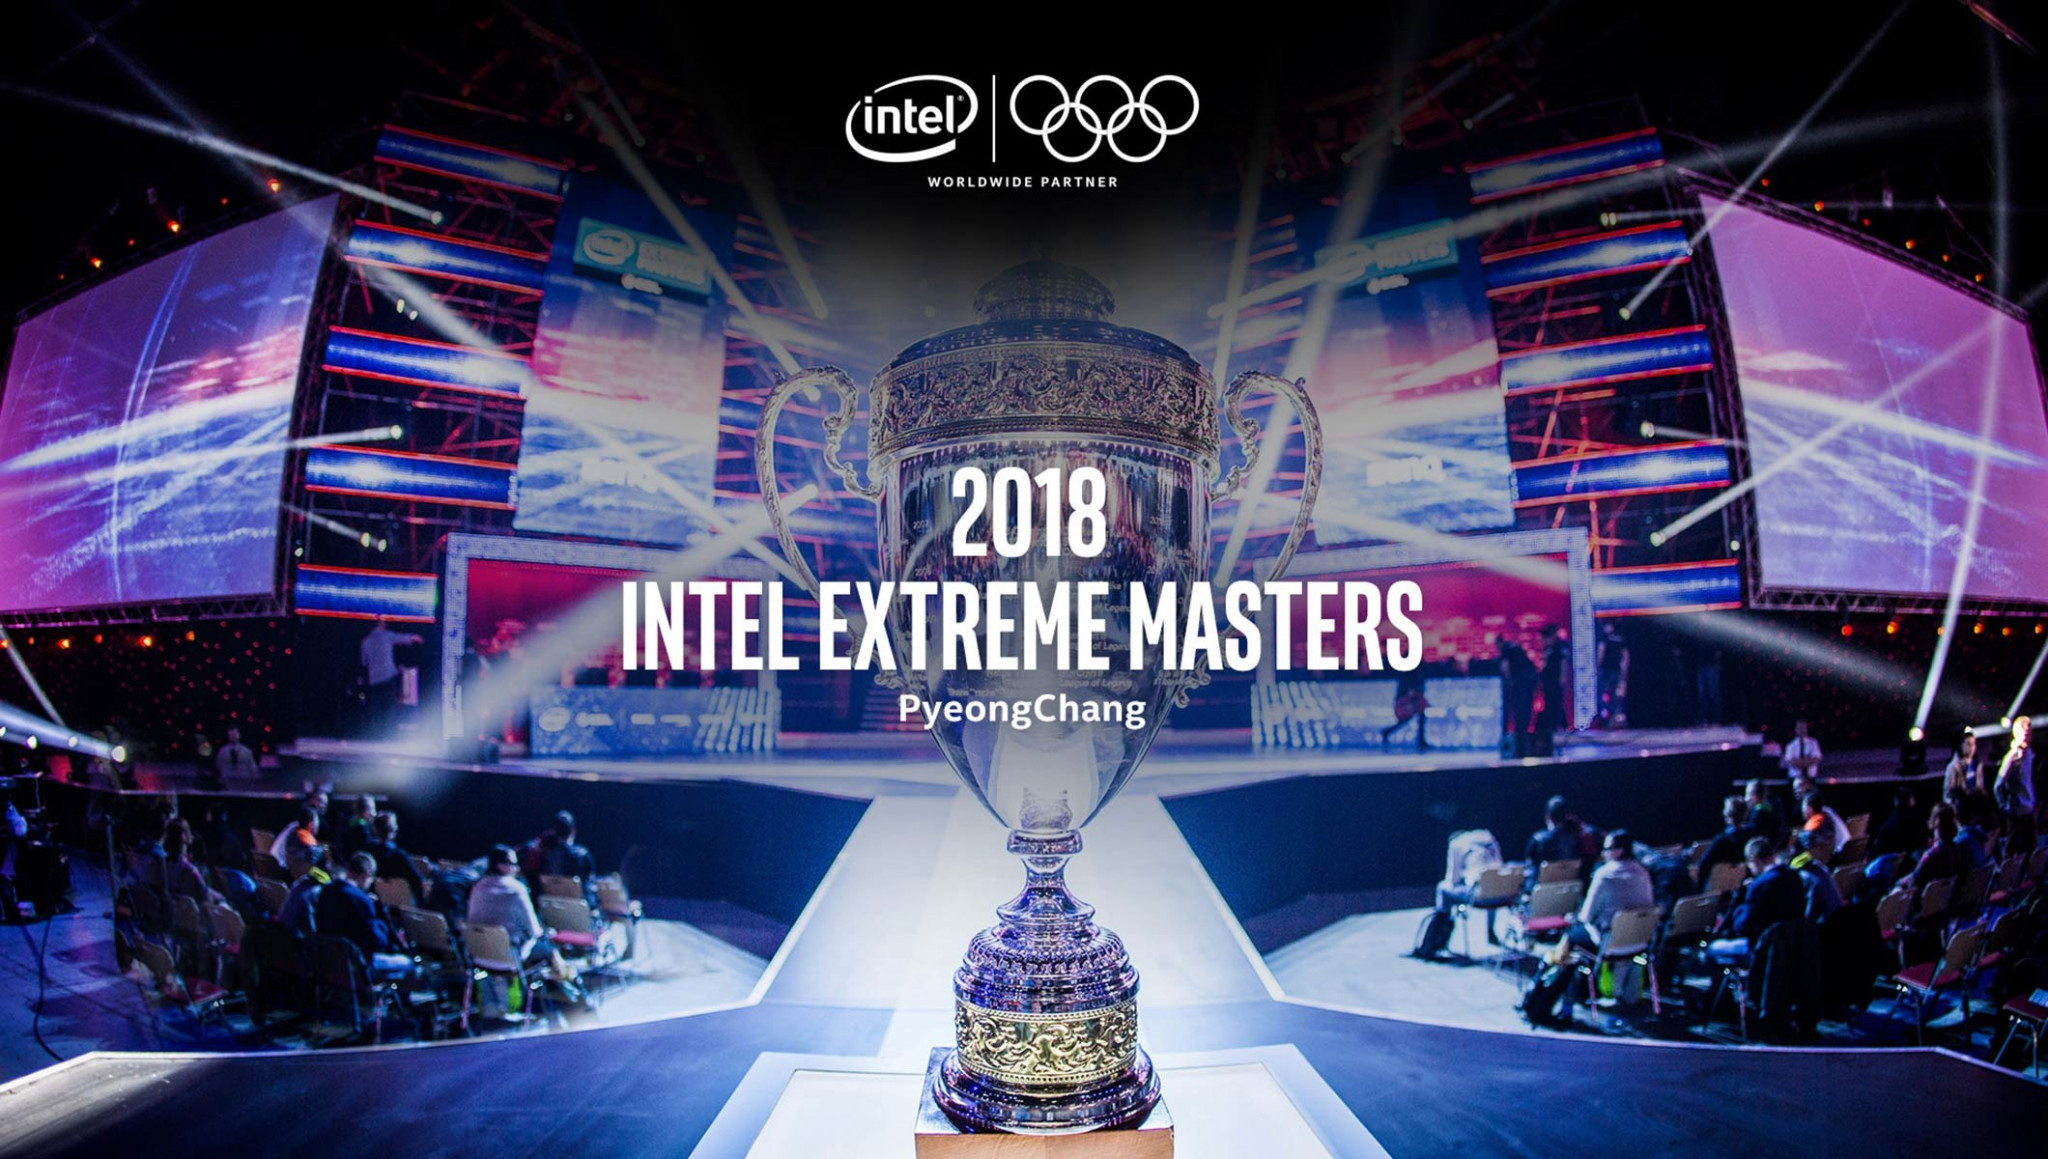 Intel have announced an esports event prior to the Pyeongchang 2018 Winter Olympics ©Intel